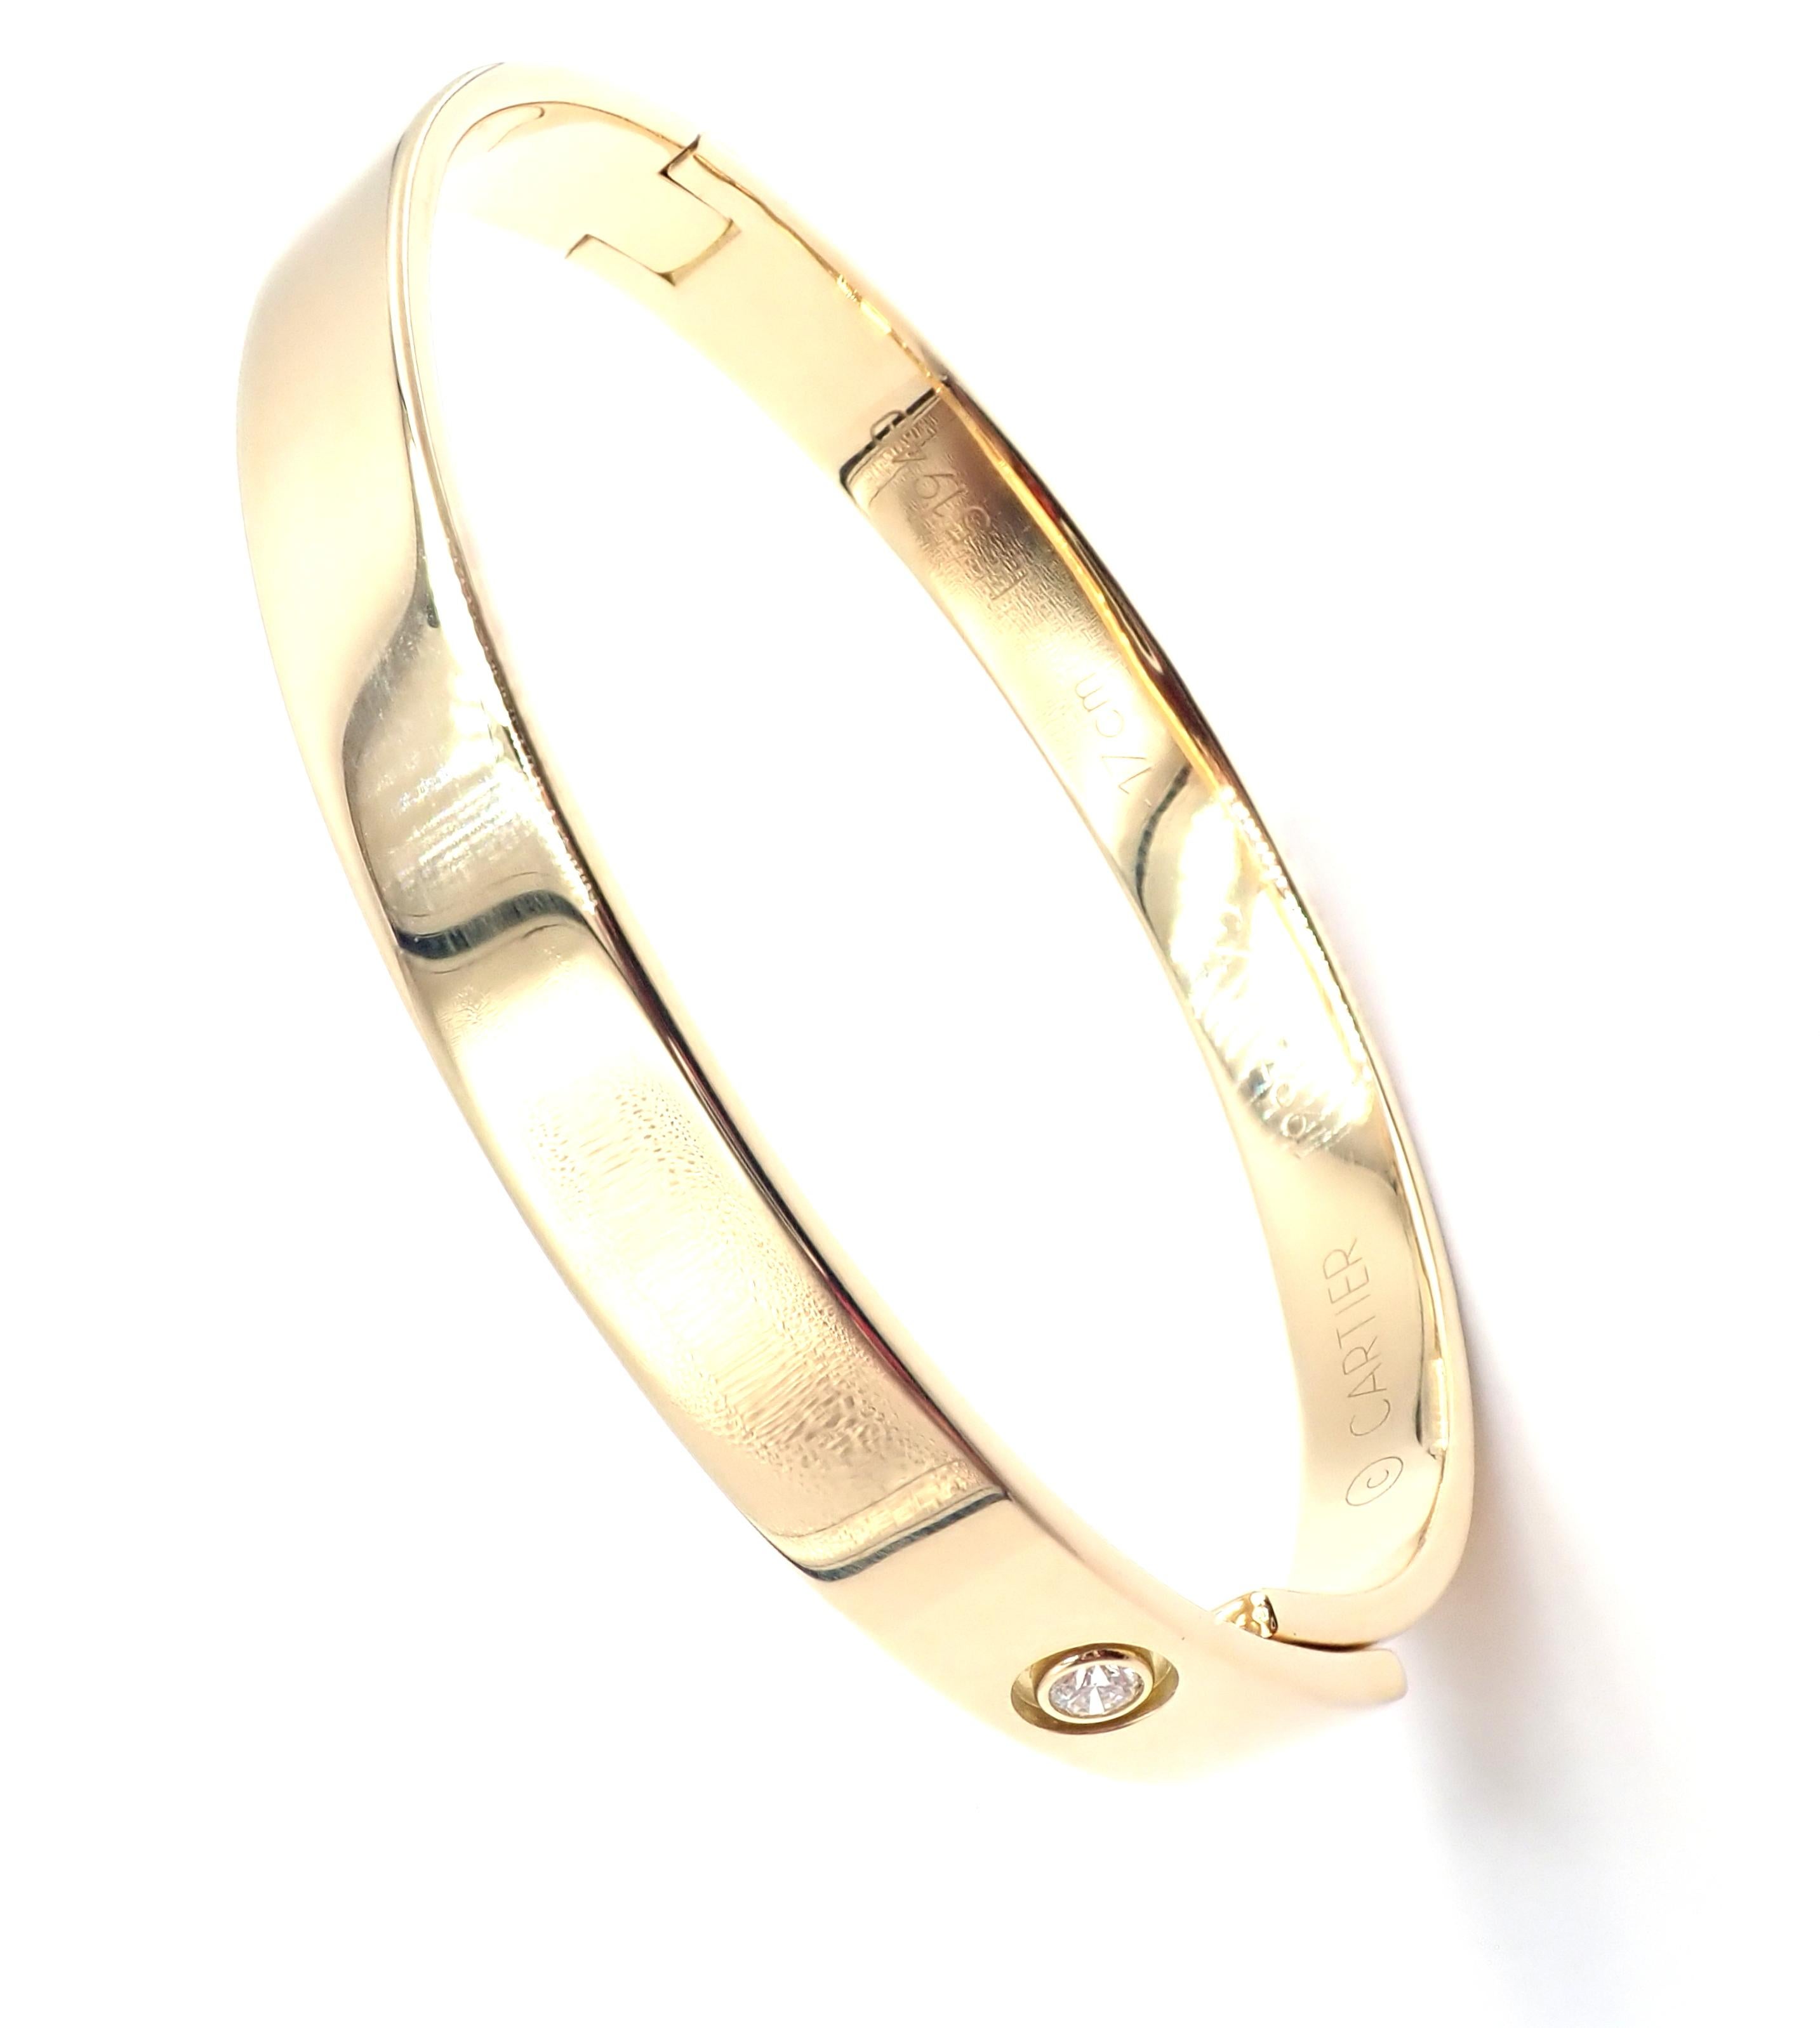 18k Yellow Gold Diamond Anniversary Bangle Bracelet By Cartier. 
 Size 17. 
 This bracelet comes with an original Cartier box. 
 With 1 round brilliant cut diamond VS1 clarity, G color total weight .10ct
This bracelet comes with service paper from